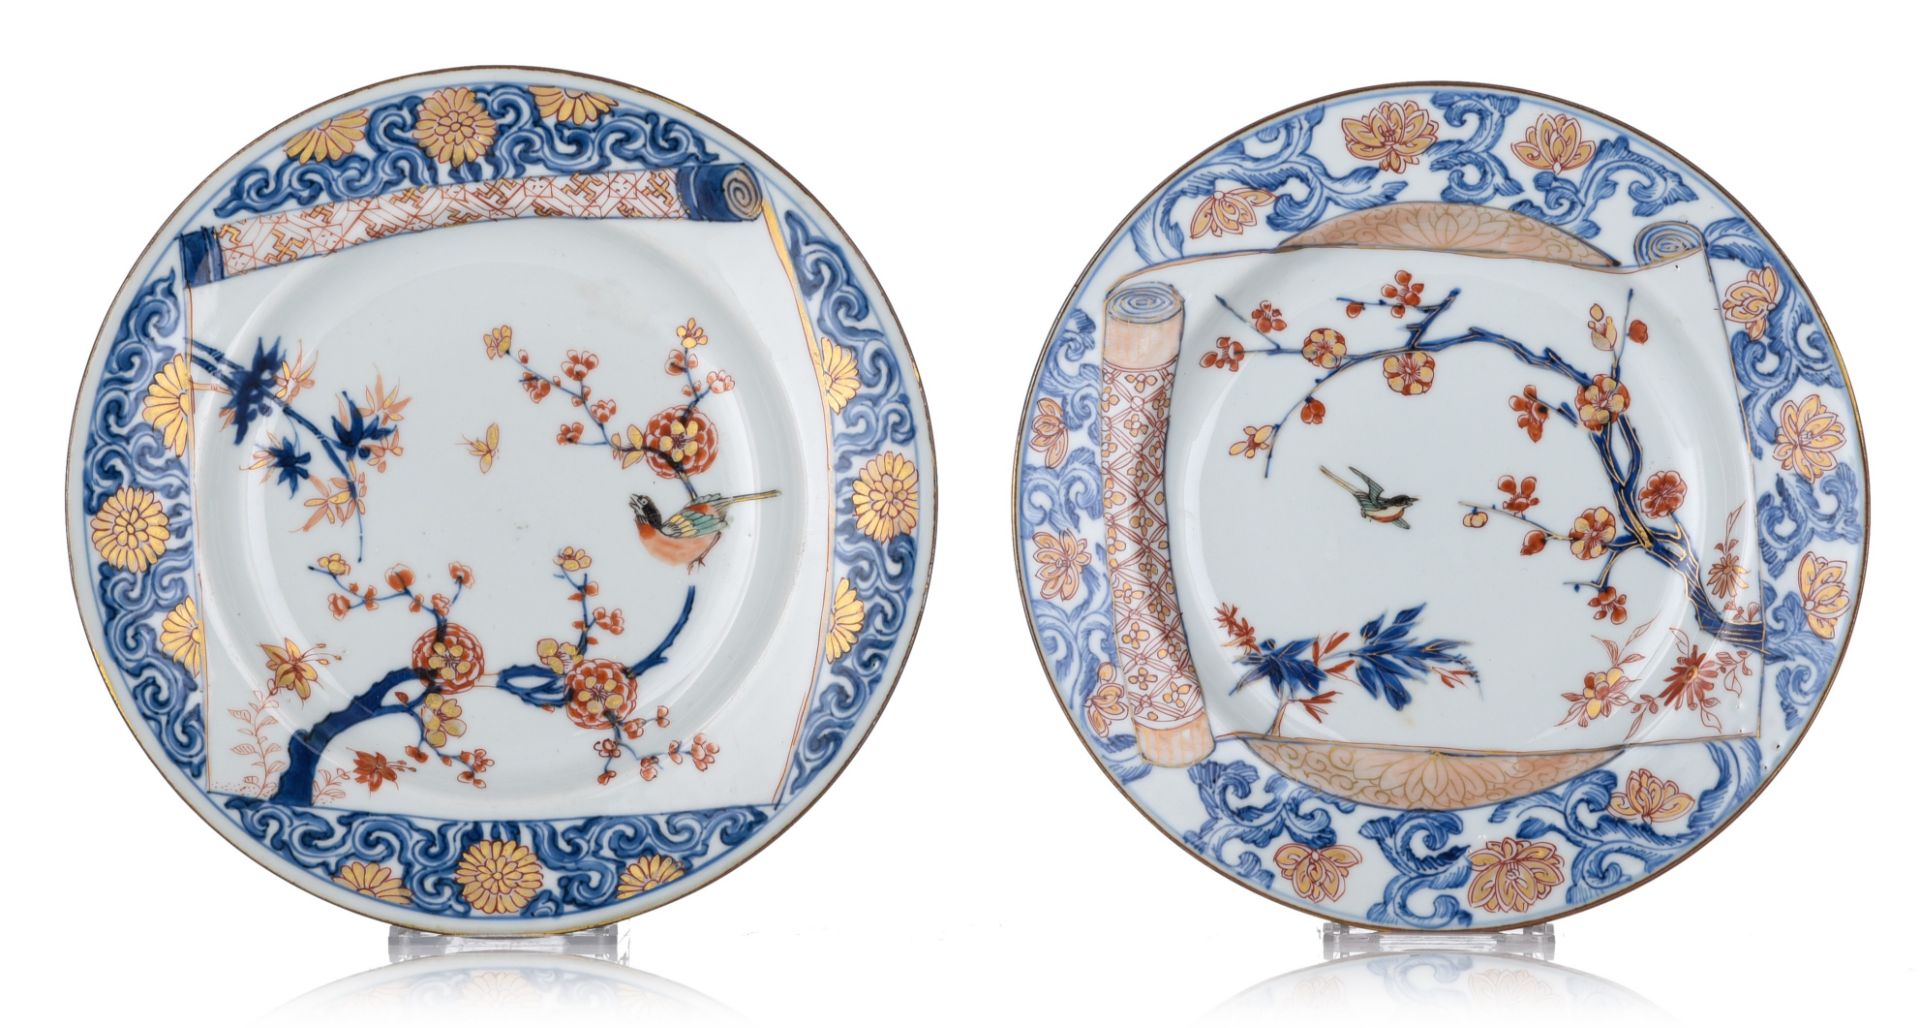 A collection of fine Chinese famille rose export porcelain dishes and a plate, 18thC, largest dimens - Image 2 of 10